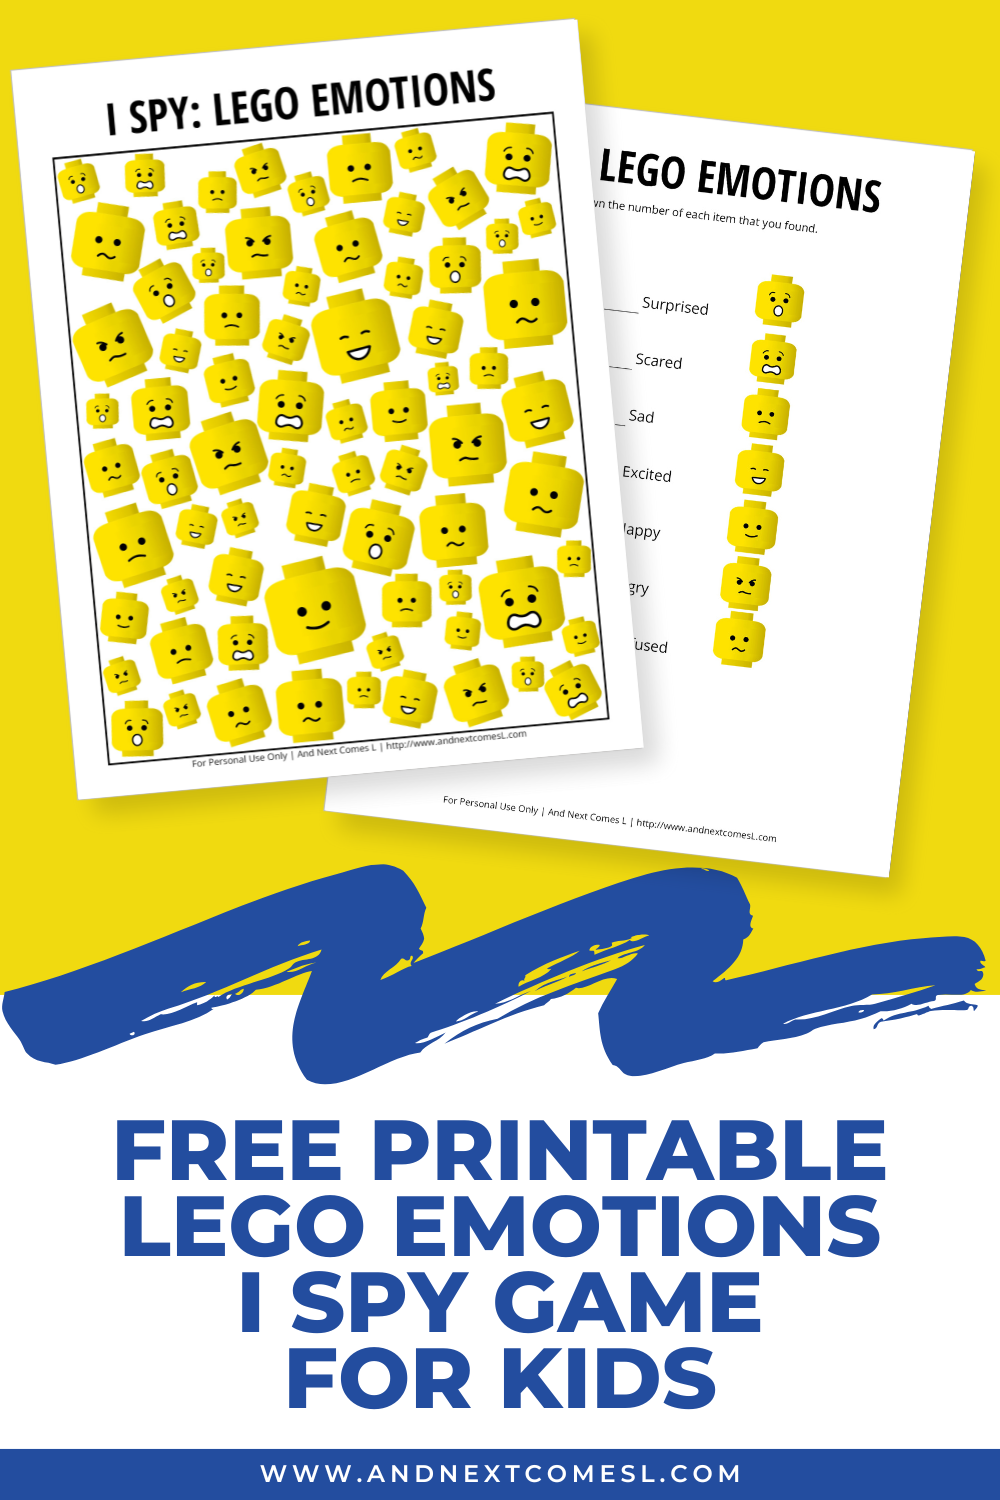 Free printable LEGO emotions themed I spy game for kids